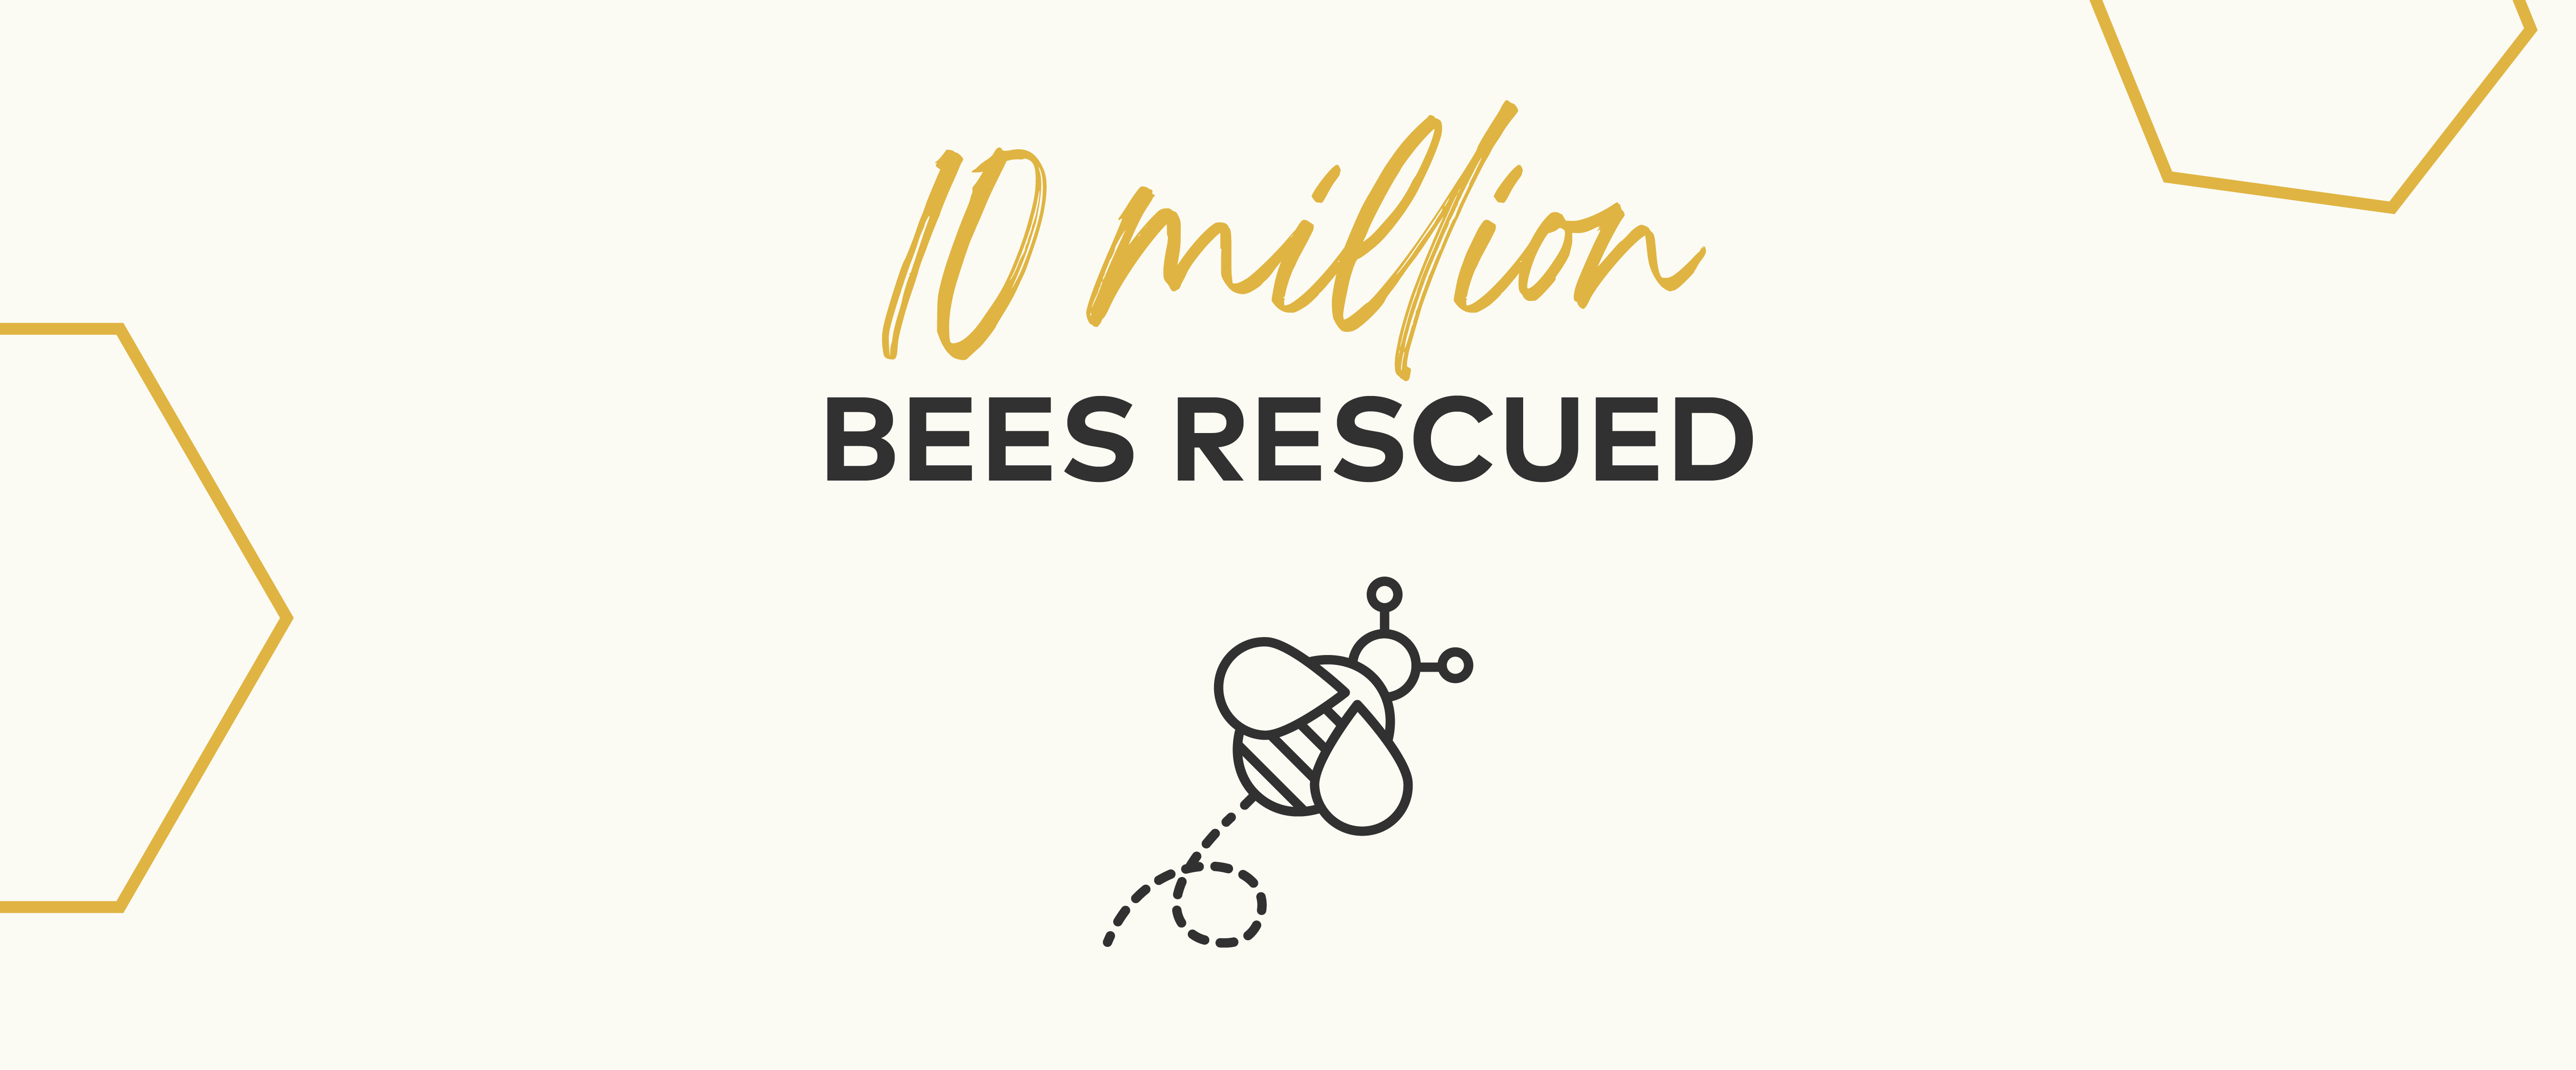 10 Million Bees Rescued